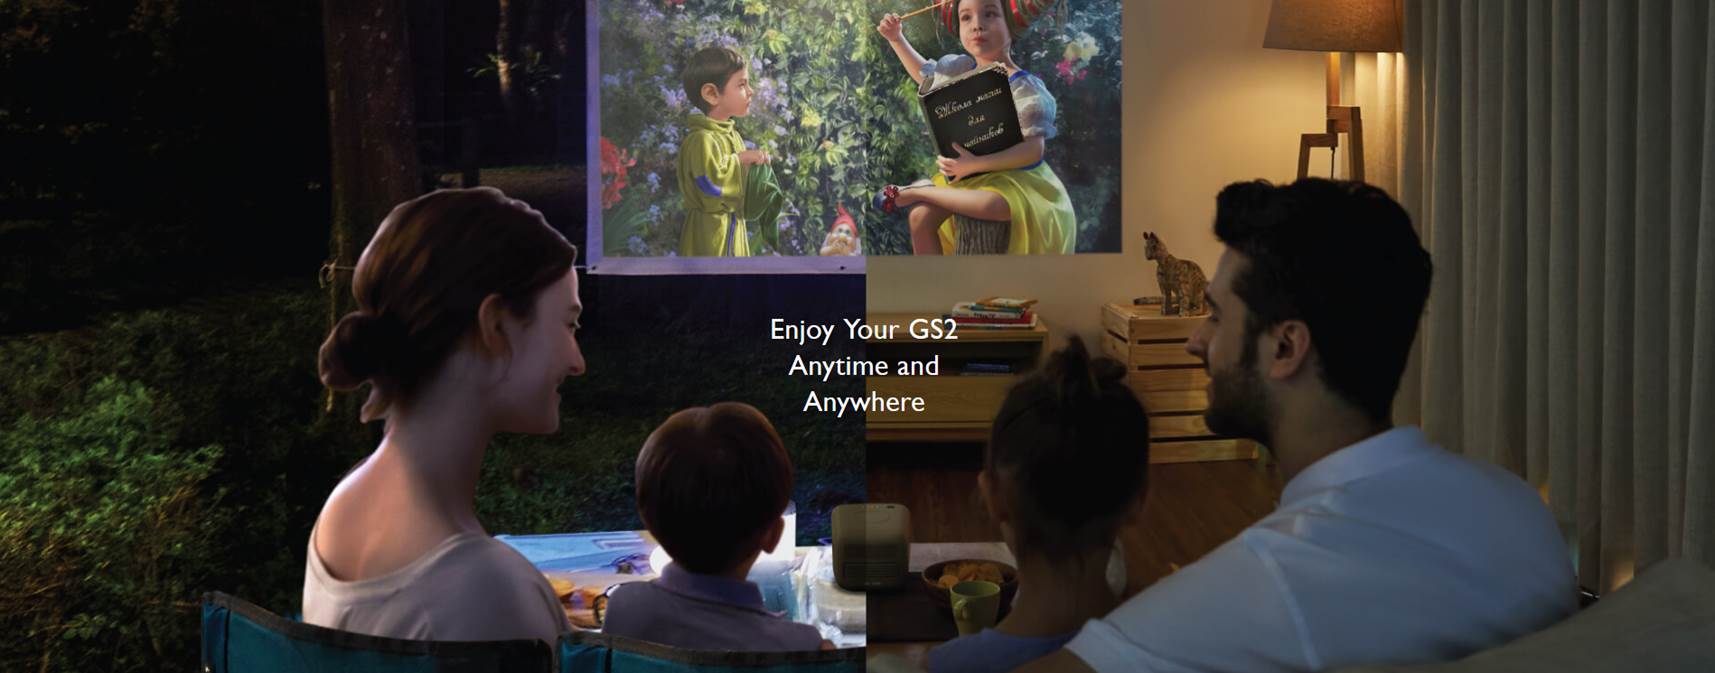 Stay at home | Entertainment for family with GS2 Mini Projector Mobile Projector
